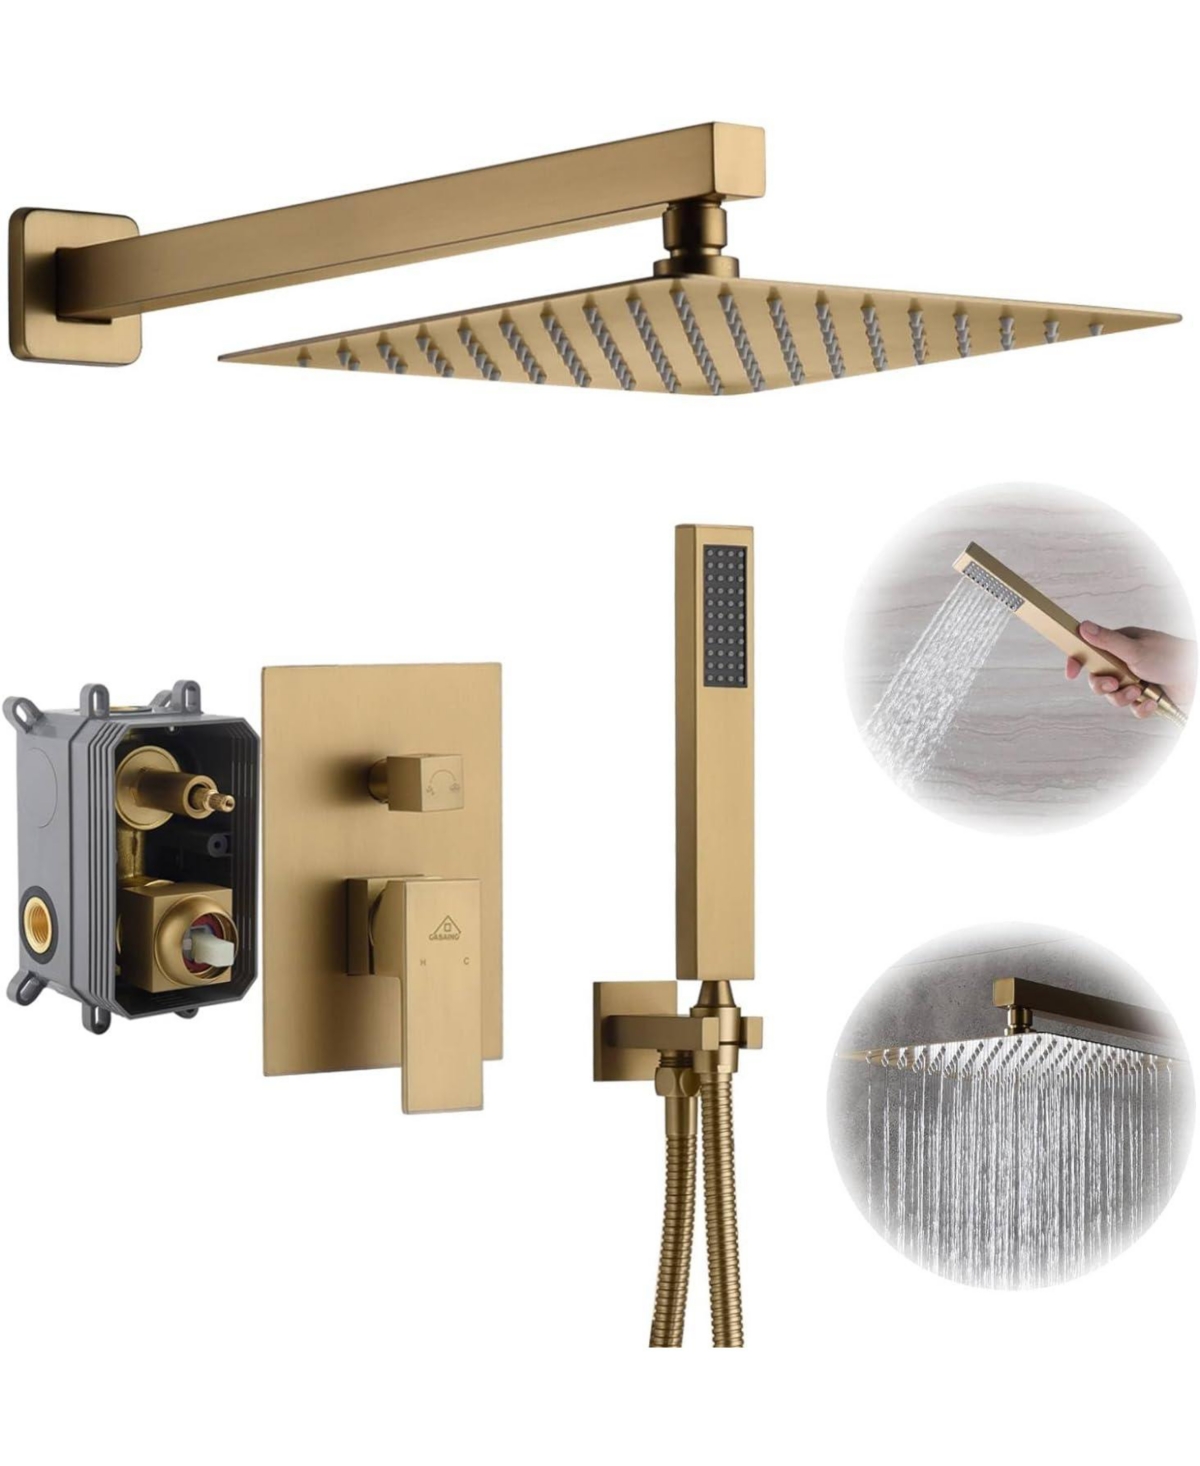 10" Inch Wall Mounted Square Shower System Set with Handheld Spray - Brushed gold